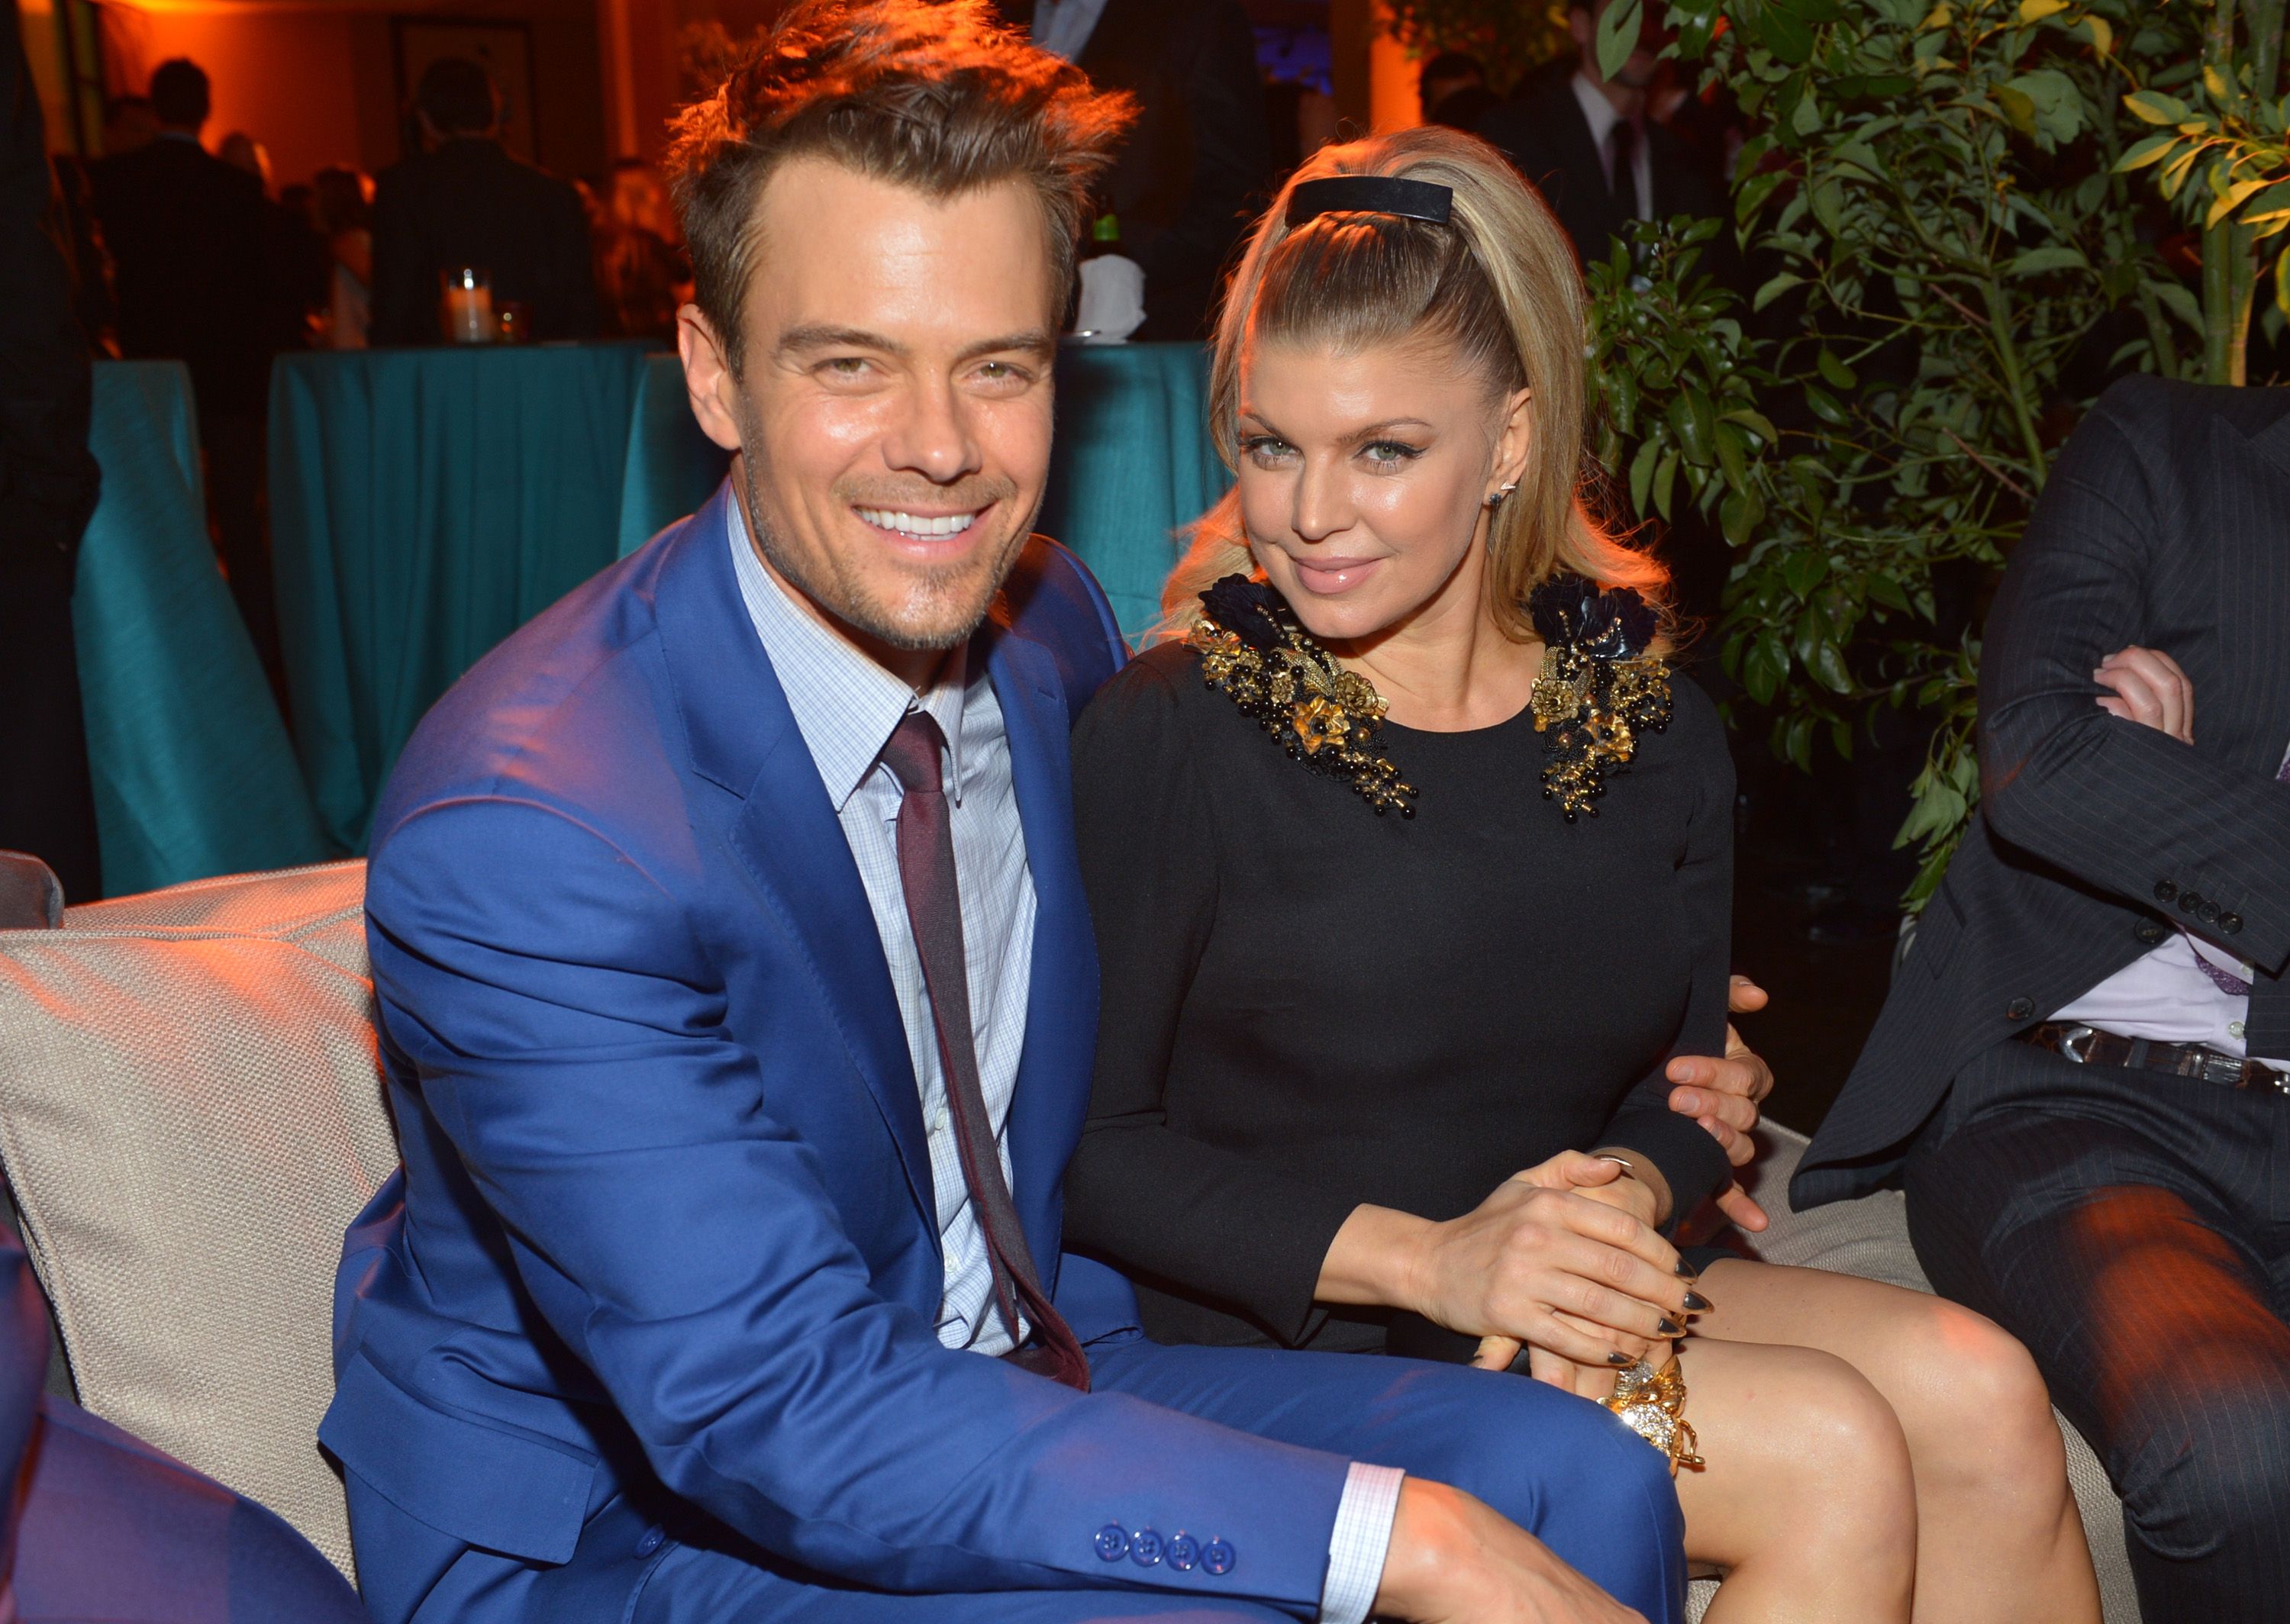 Josh Duhamel and singer Fergie at the premiere of  "Safe Haven" in 2013 in Hollywood | Source: Getty Images